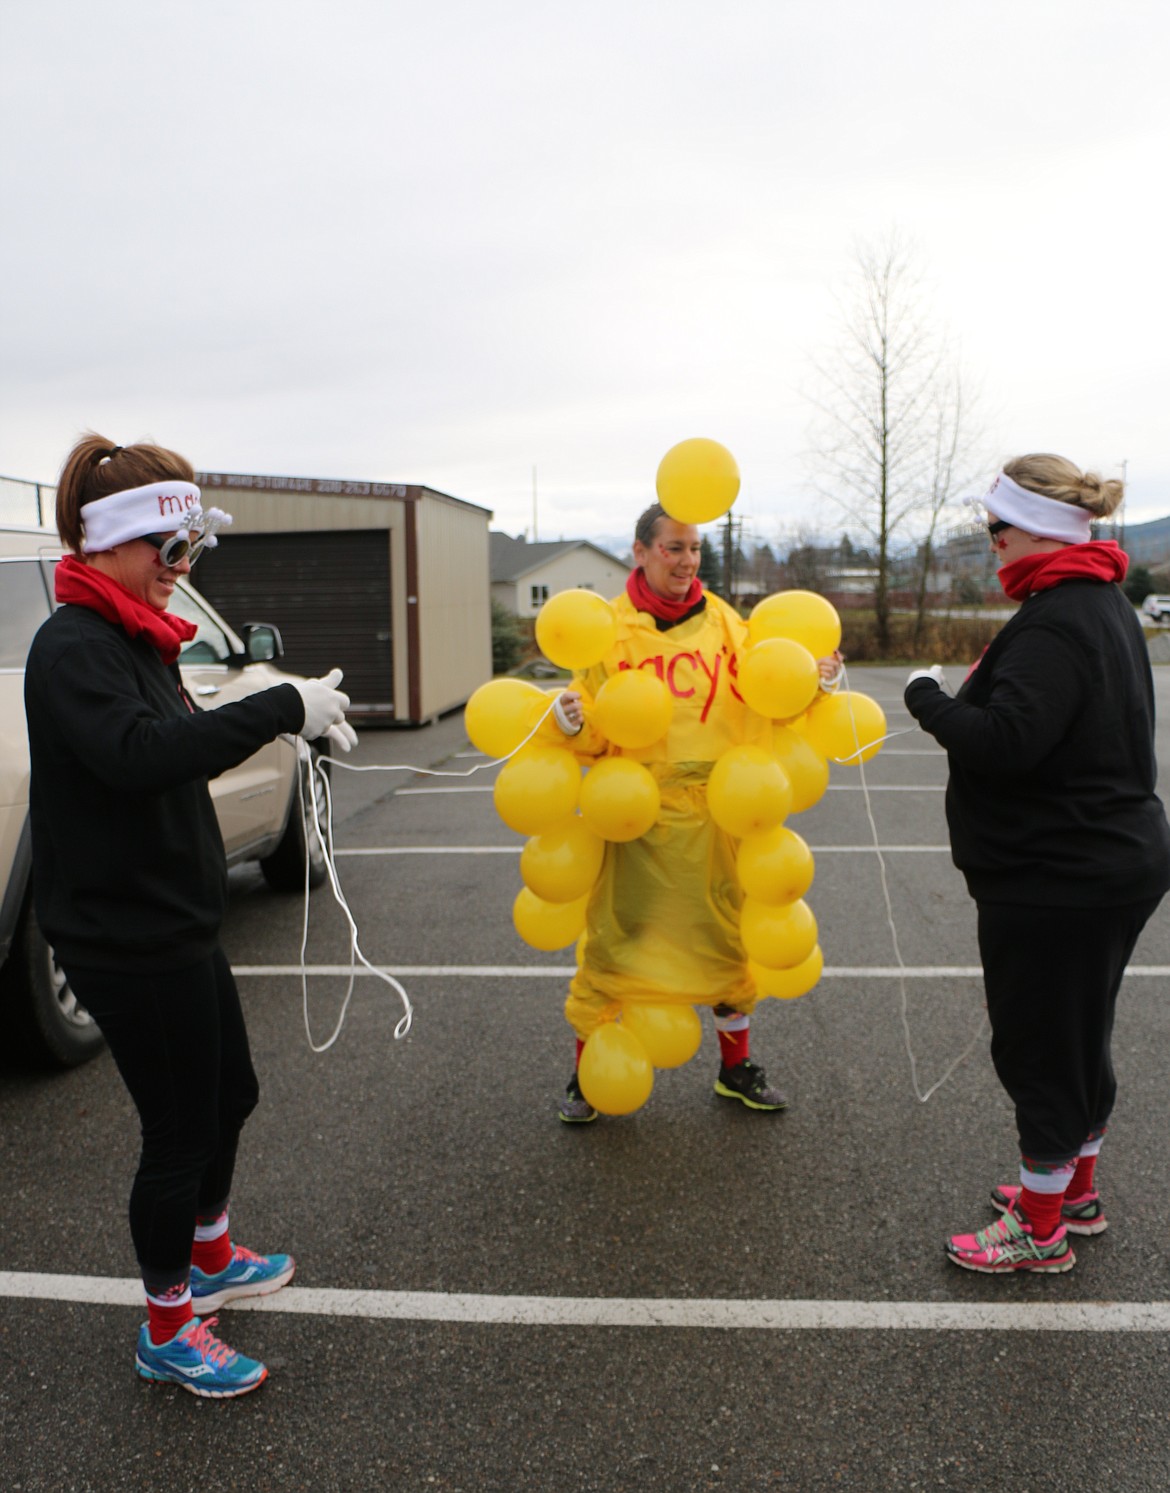 &#151;Photo by CAROLINE LOBSINGER
Sisters Vanessa, Emma and Amanda Keverkamp put the finishing touches on their Macy's Thanksgiving Day Parade-inspired costume at the start of Thursday's Turkey Trot fun run.